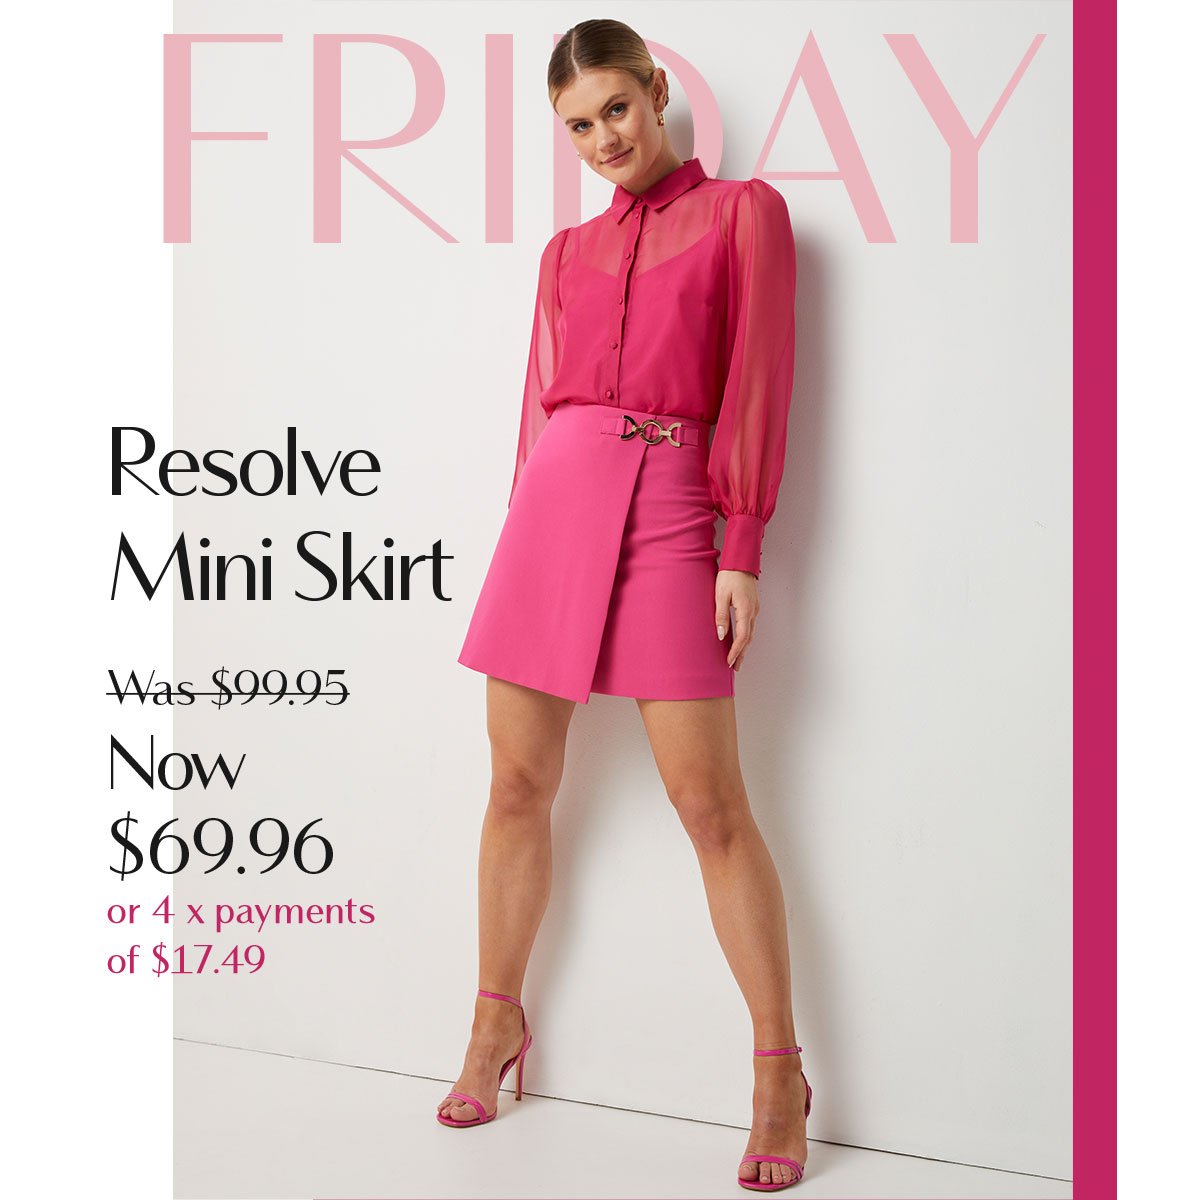 FRIDAY | Resolve Mini Skirt  Was $99.95 Now $69.96  or 4 x payments of $17.49